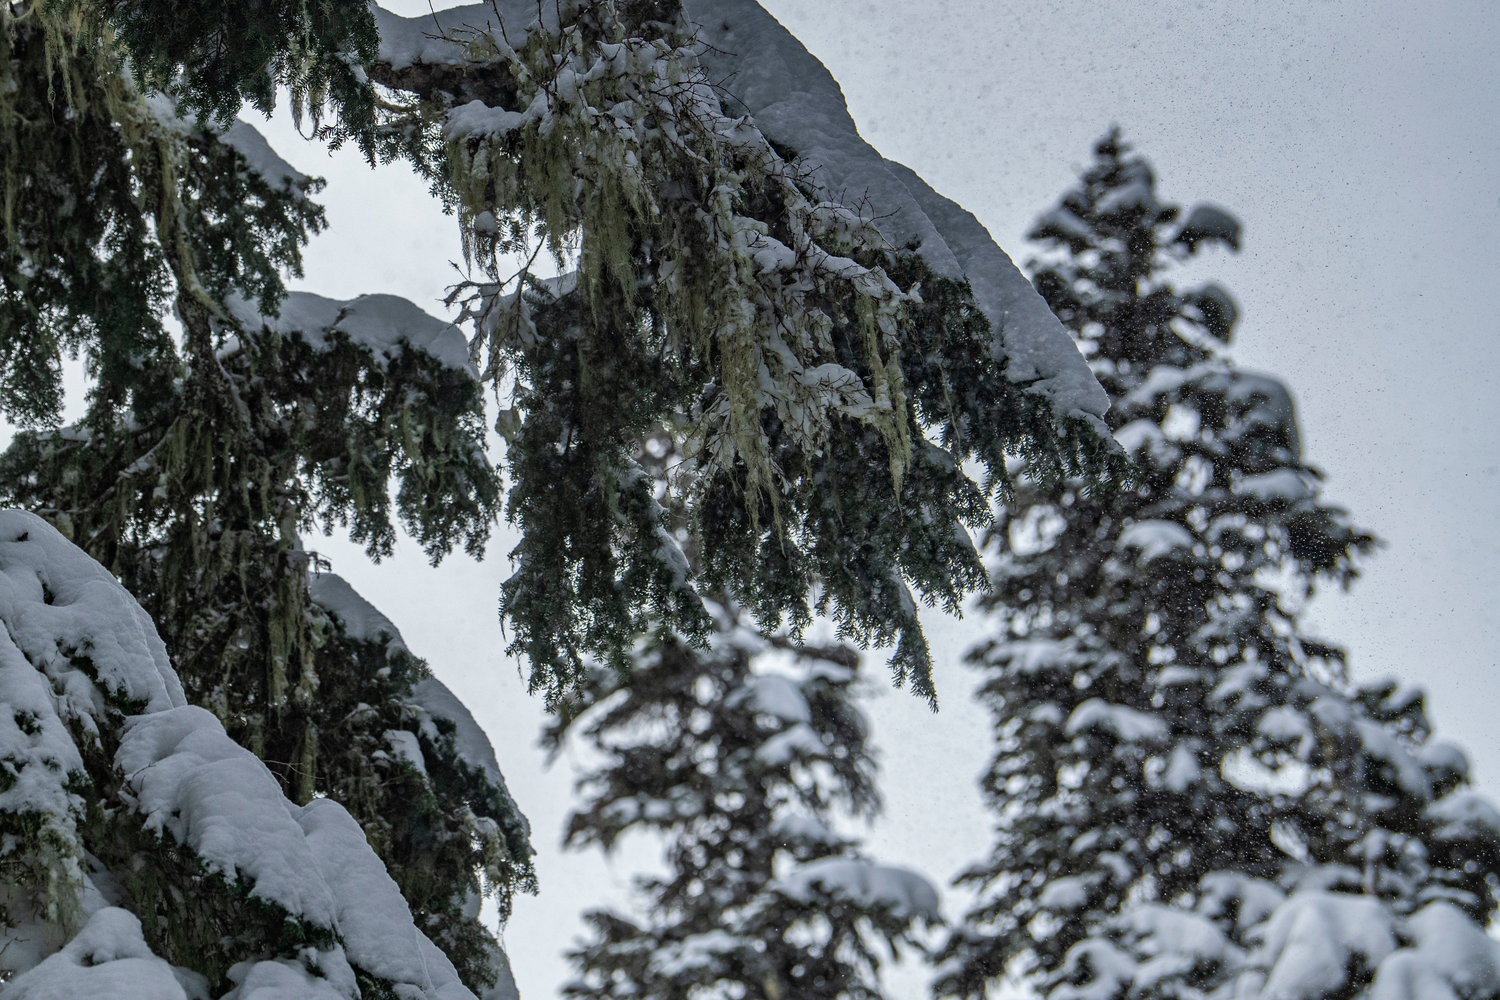 Snow is blown from evergreen boughs in the wind at White Pass Ski Area on Sunday.